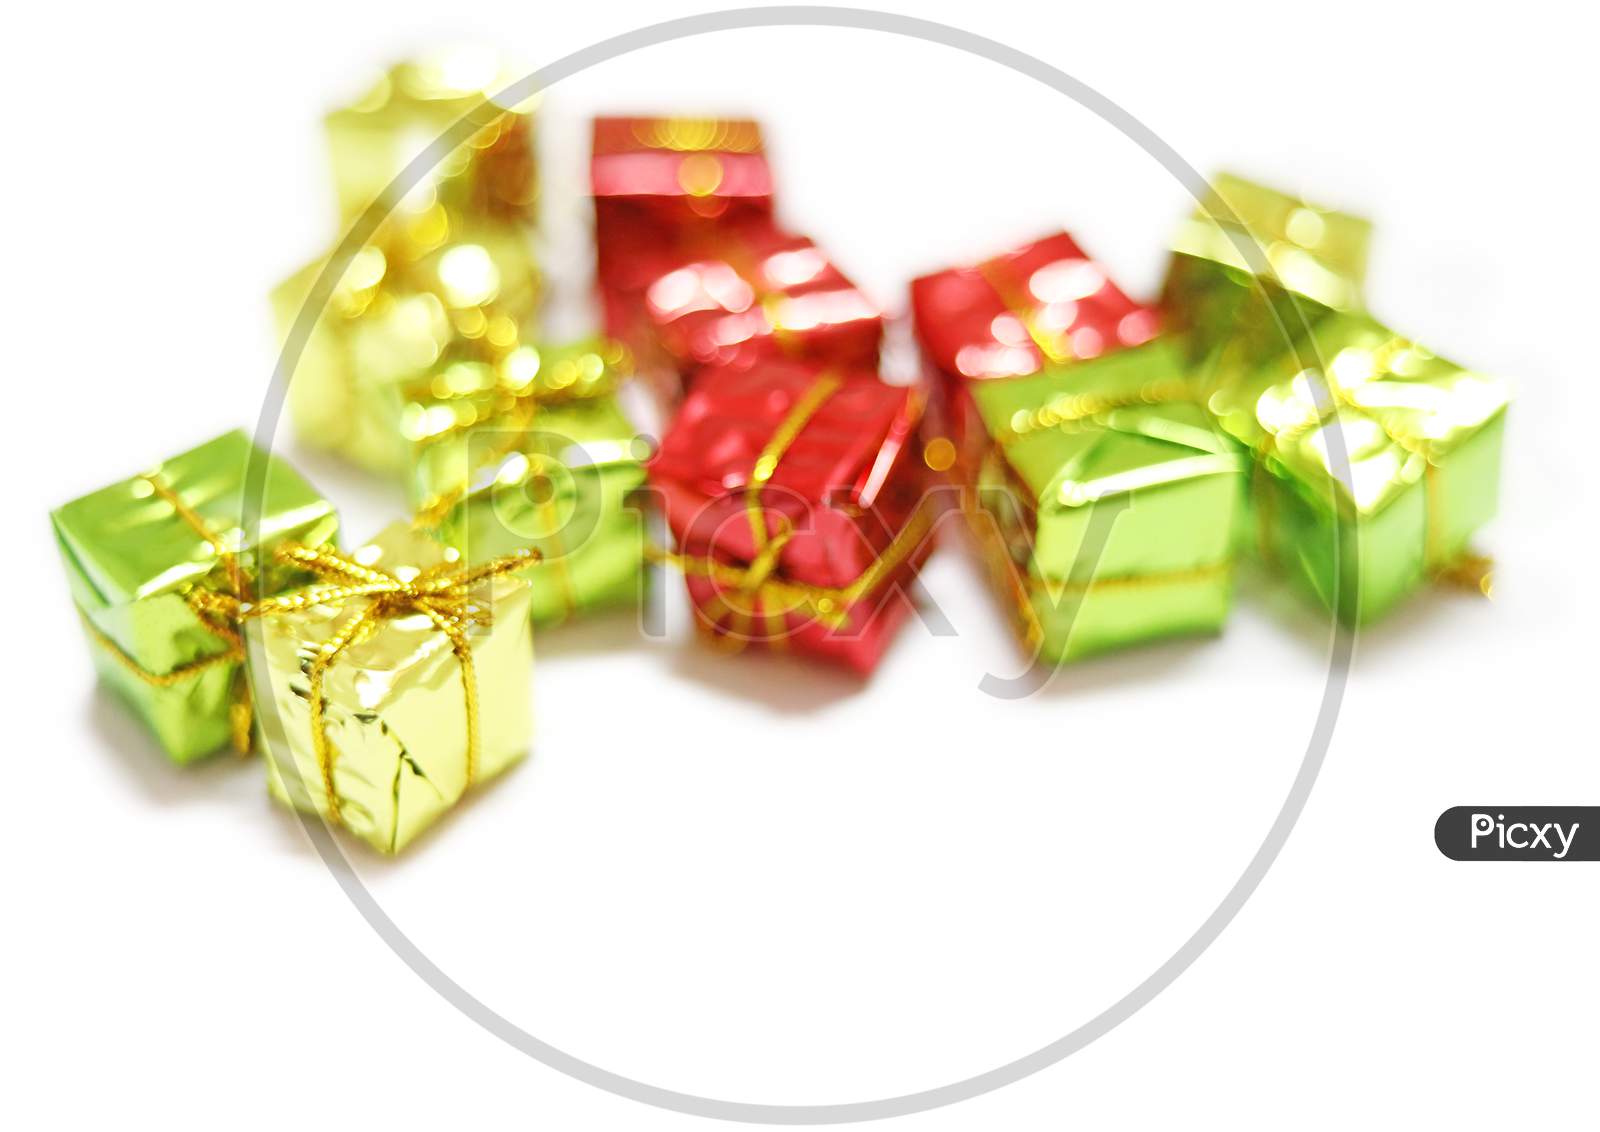 Top View Of Arranged Wrapped Christmas Gift Boxes With Ribbons On White Background